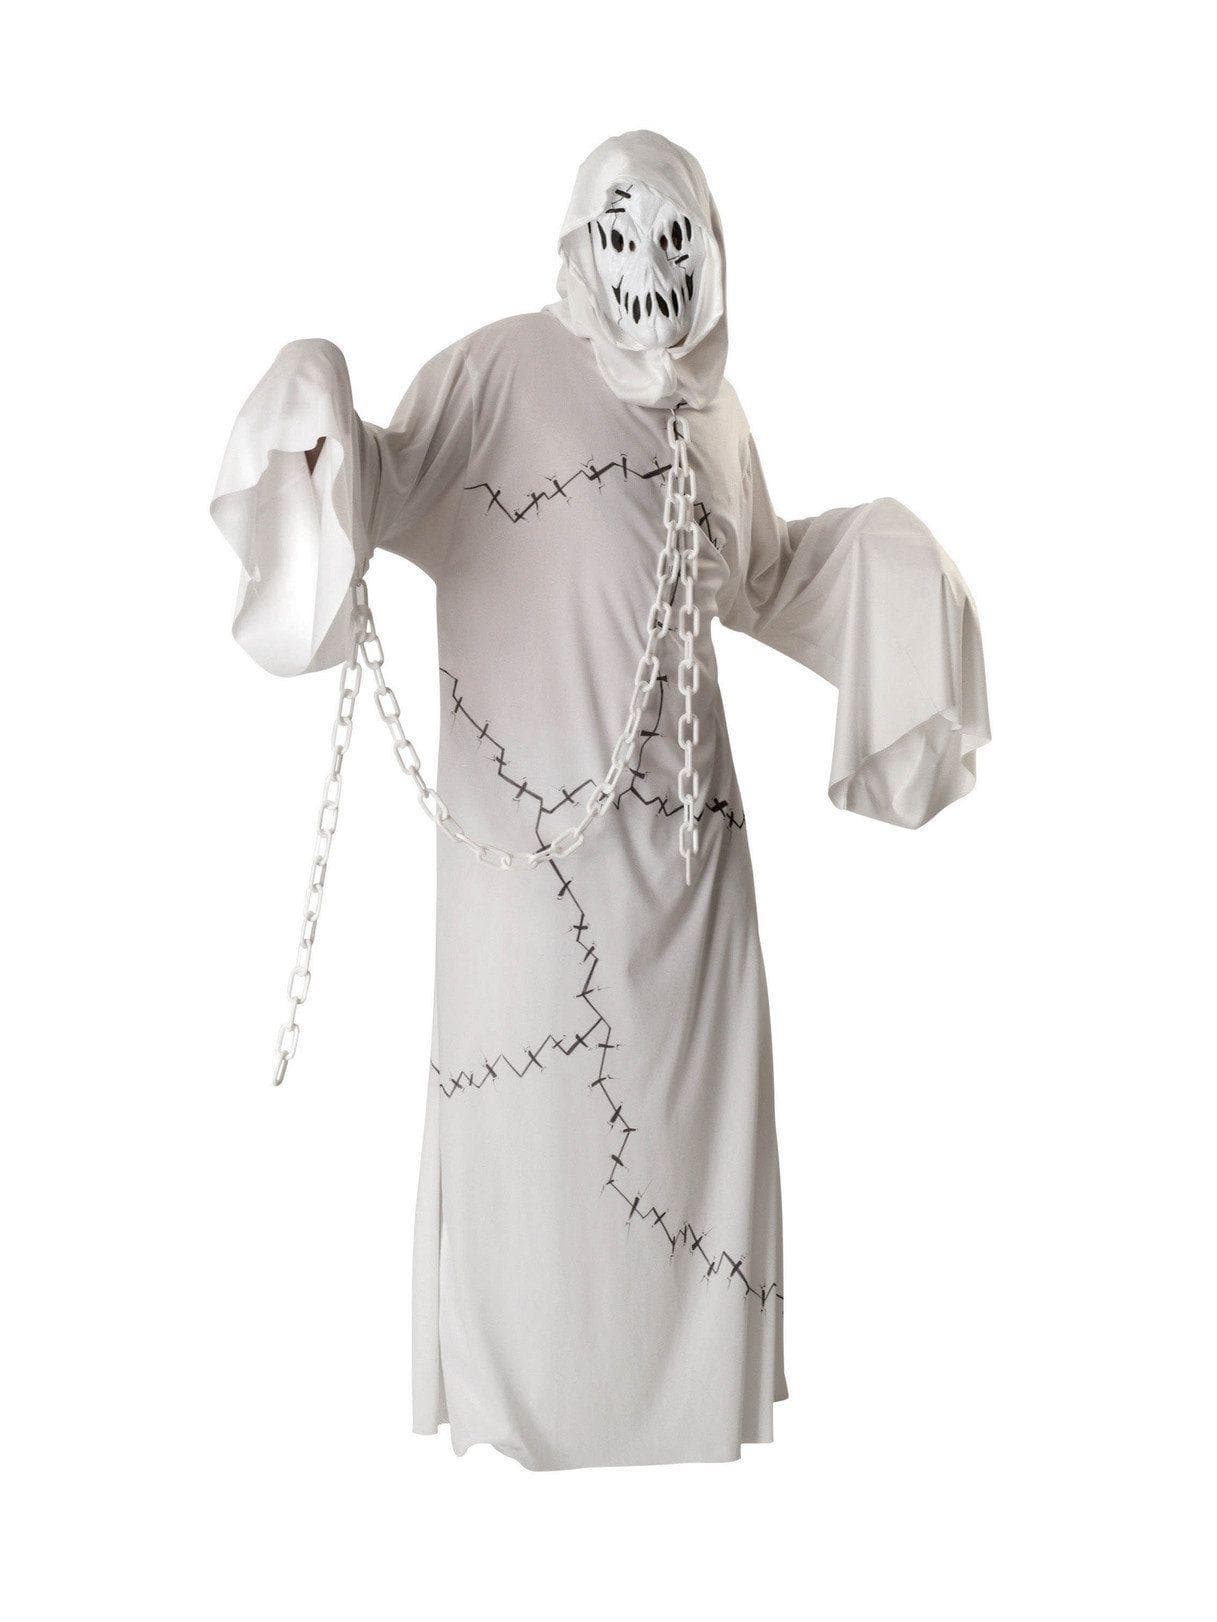 Adult Cool Ghoul Costume - costumes.com